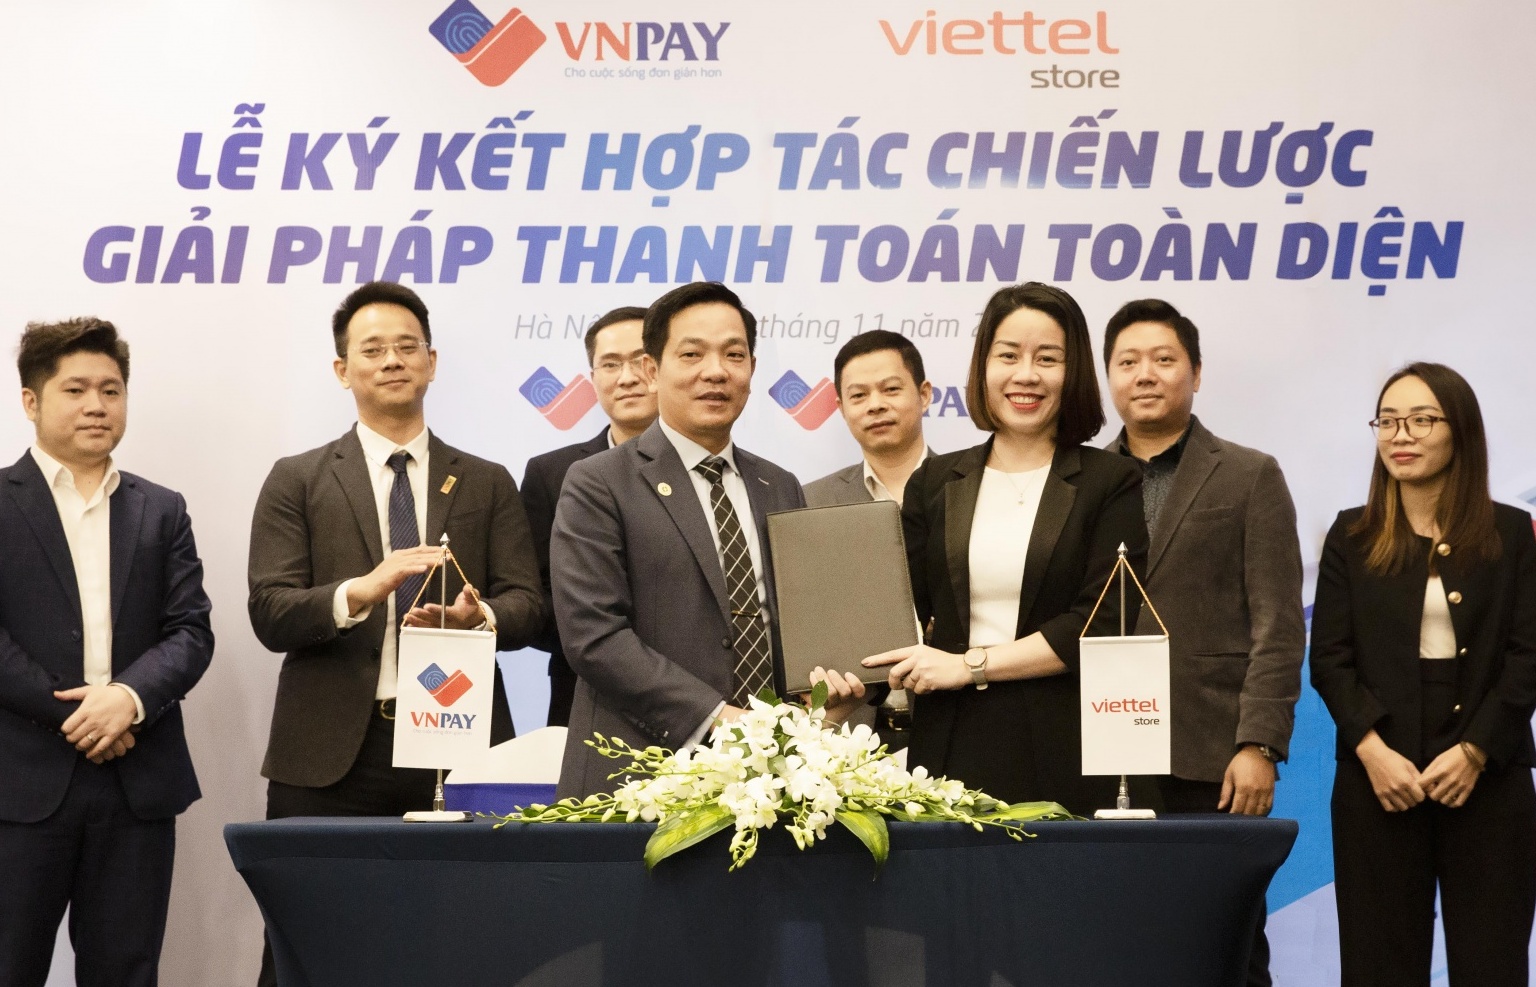 VNPAY and Viettel Store launch "All-in-one" VNPAY-POS payment solution